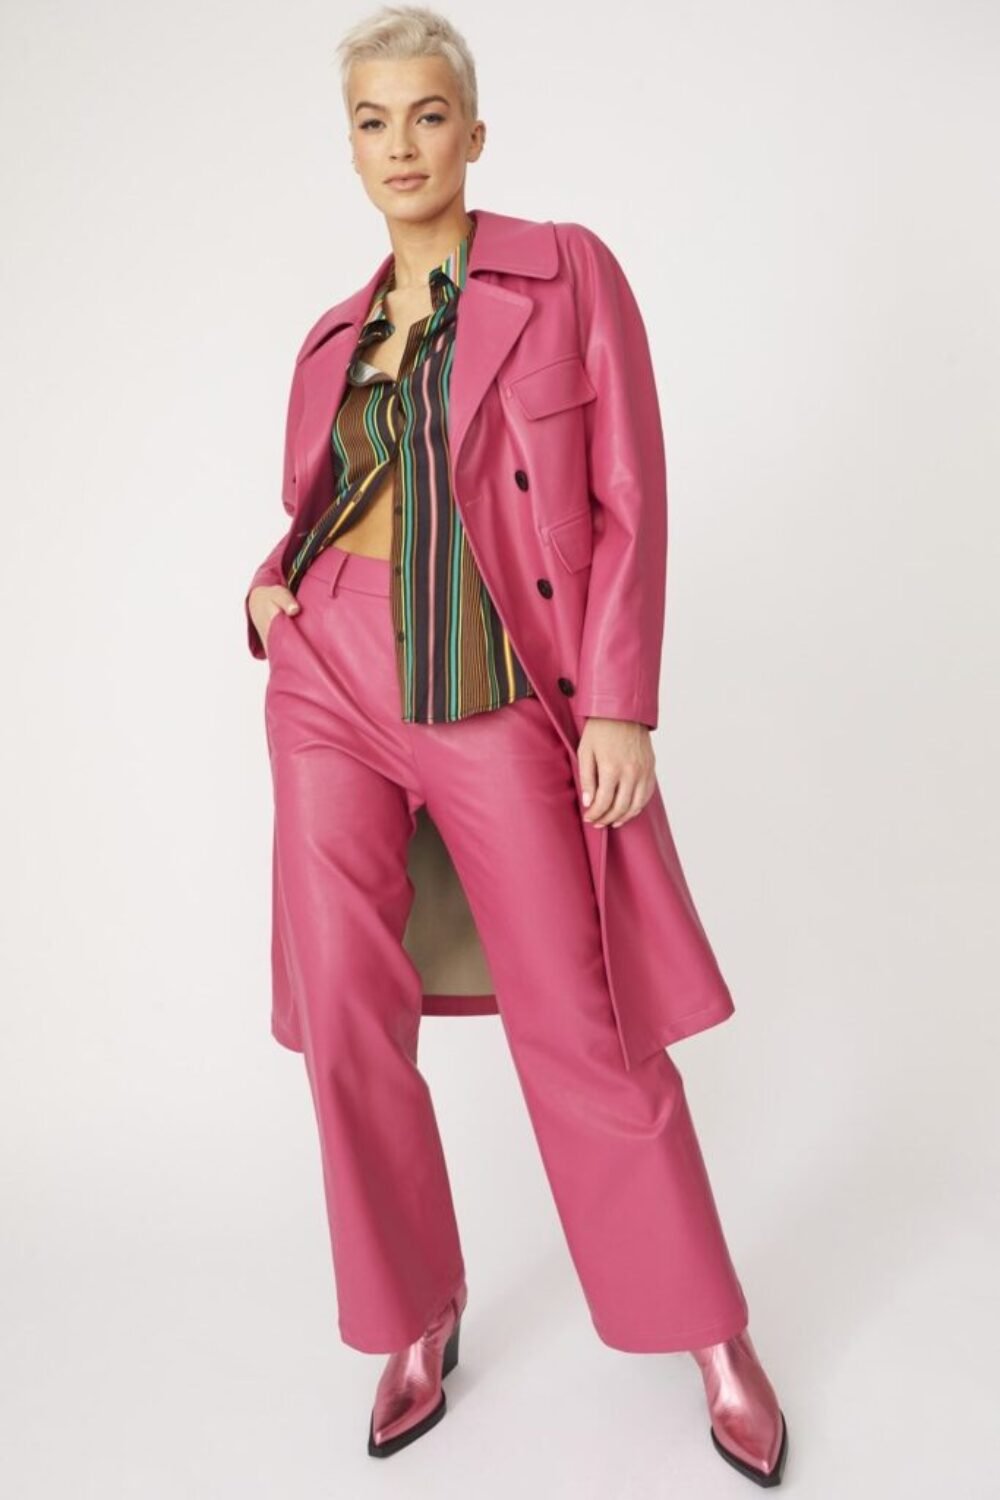 Shop Lux Pink Tencel Blend Eco Leather Trench Coat and women's luxury and designer clothes at www.lux-apparel.co.uk